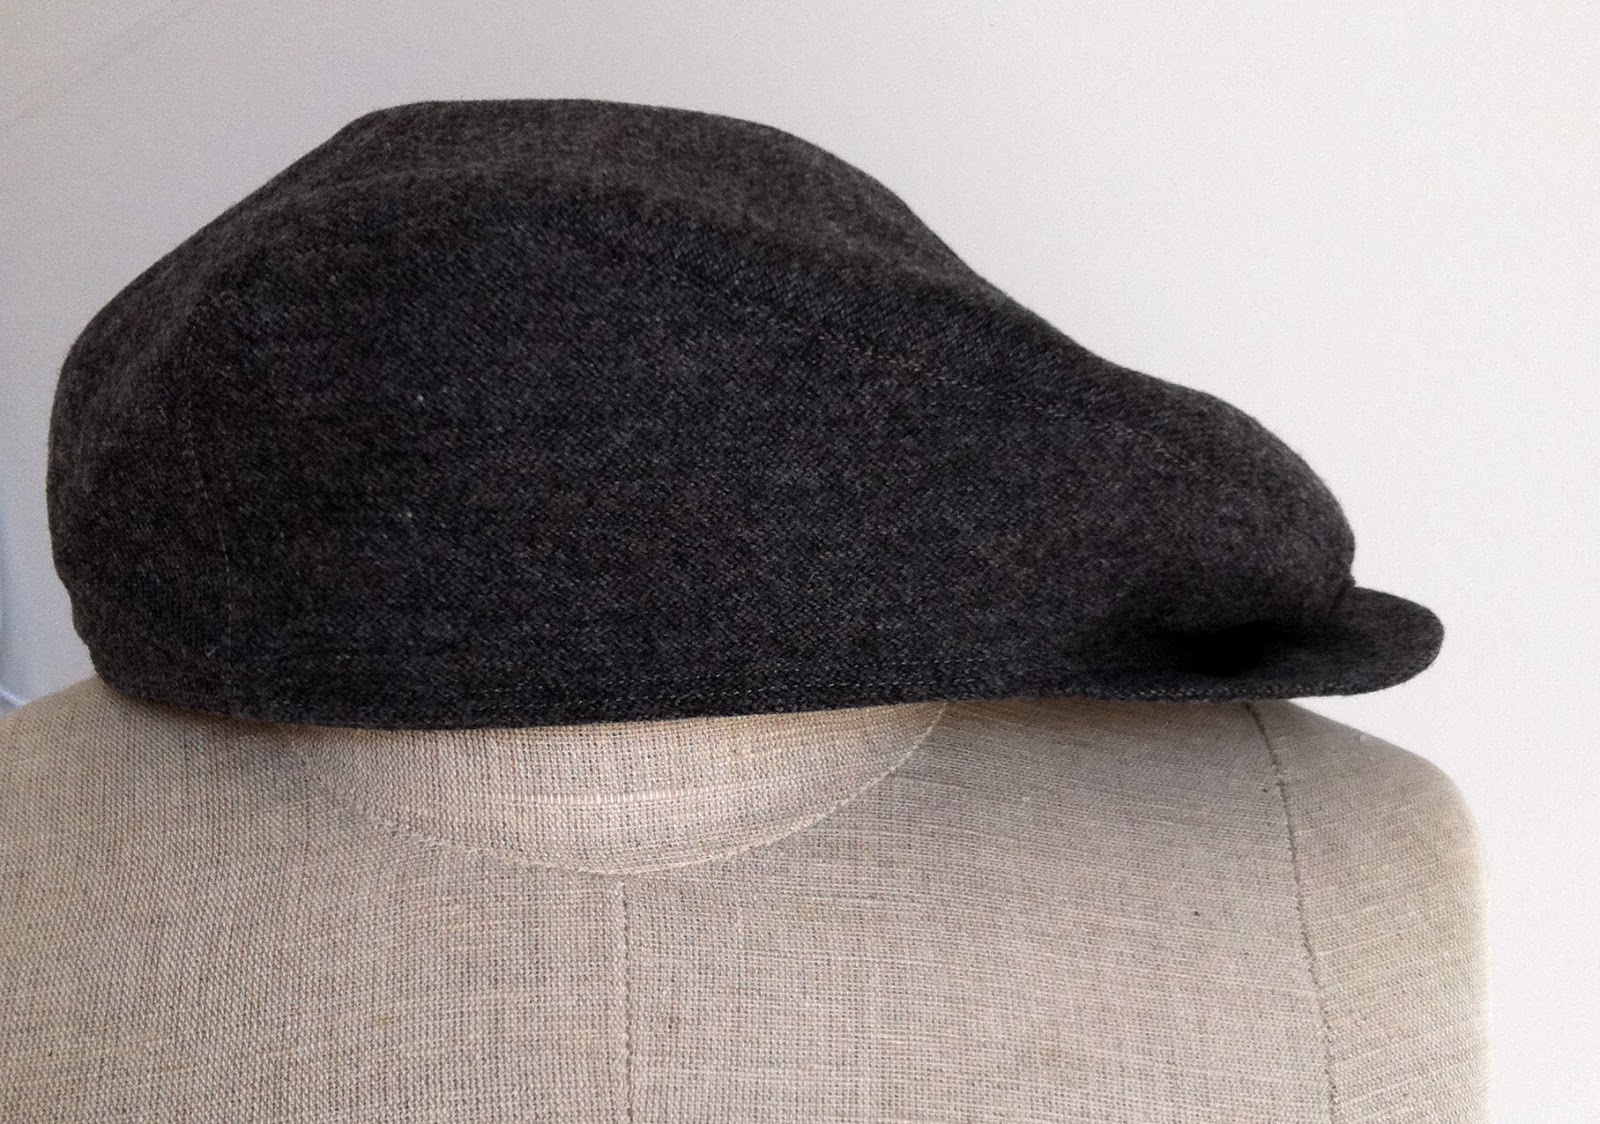 CurlyPops: A Flat Cap on a Sunday afternoon